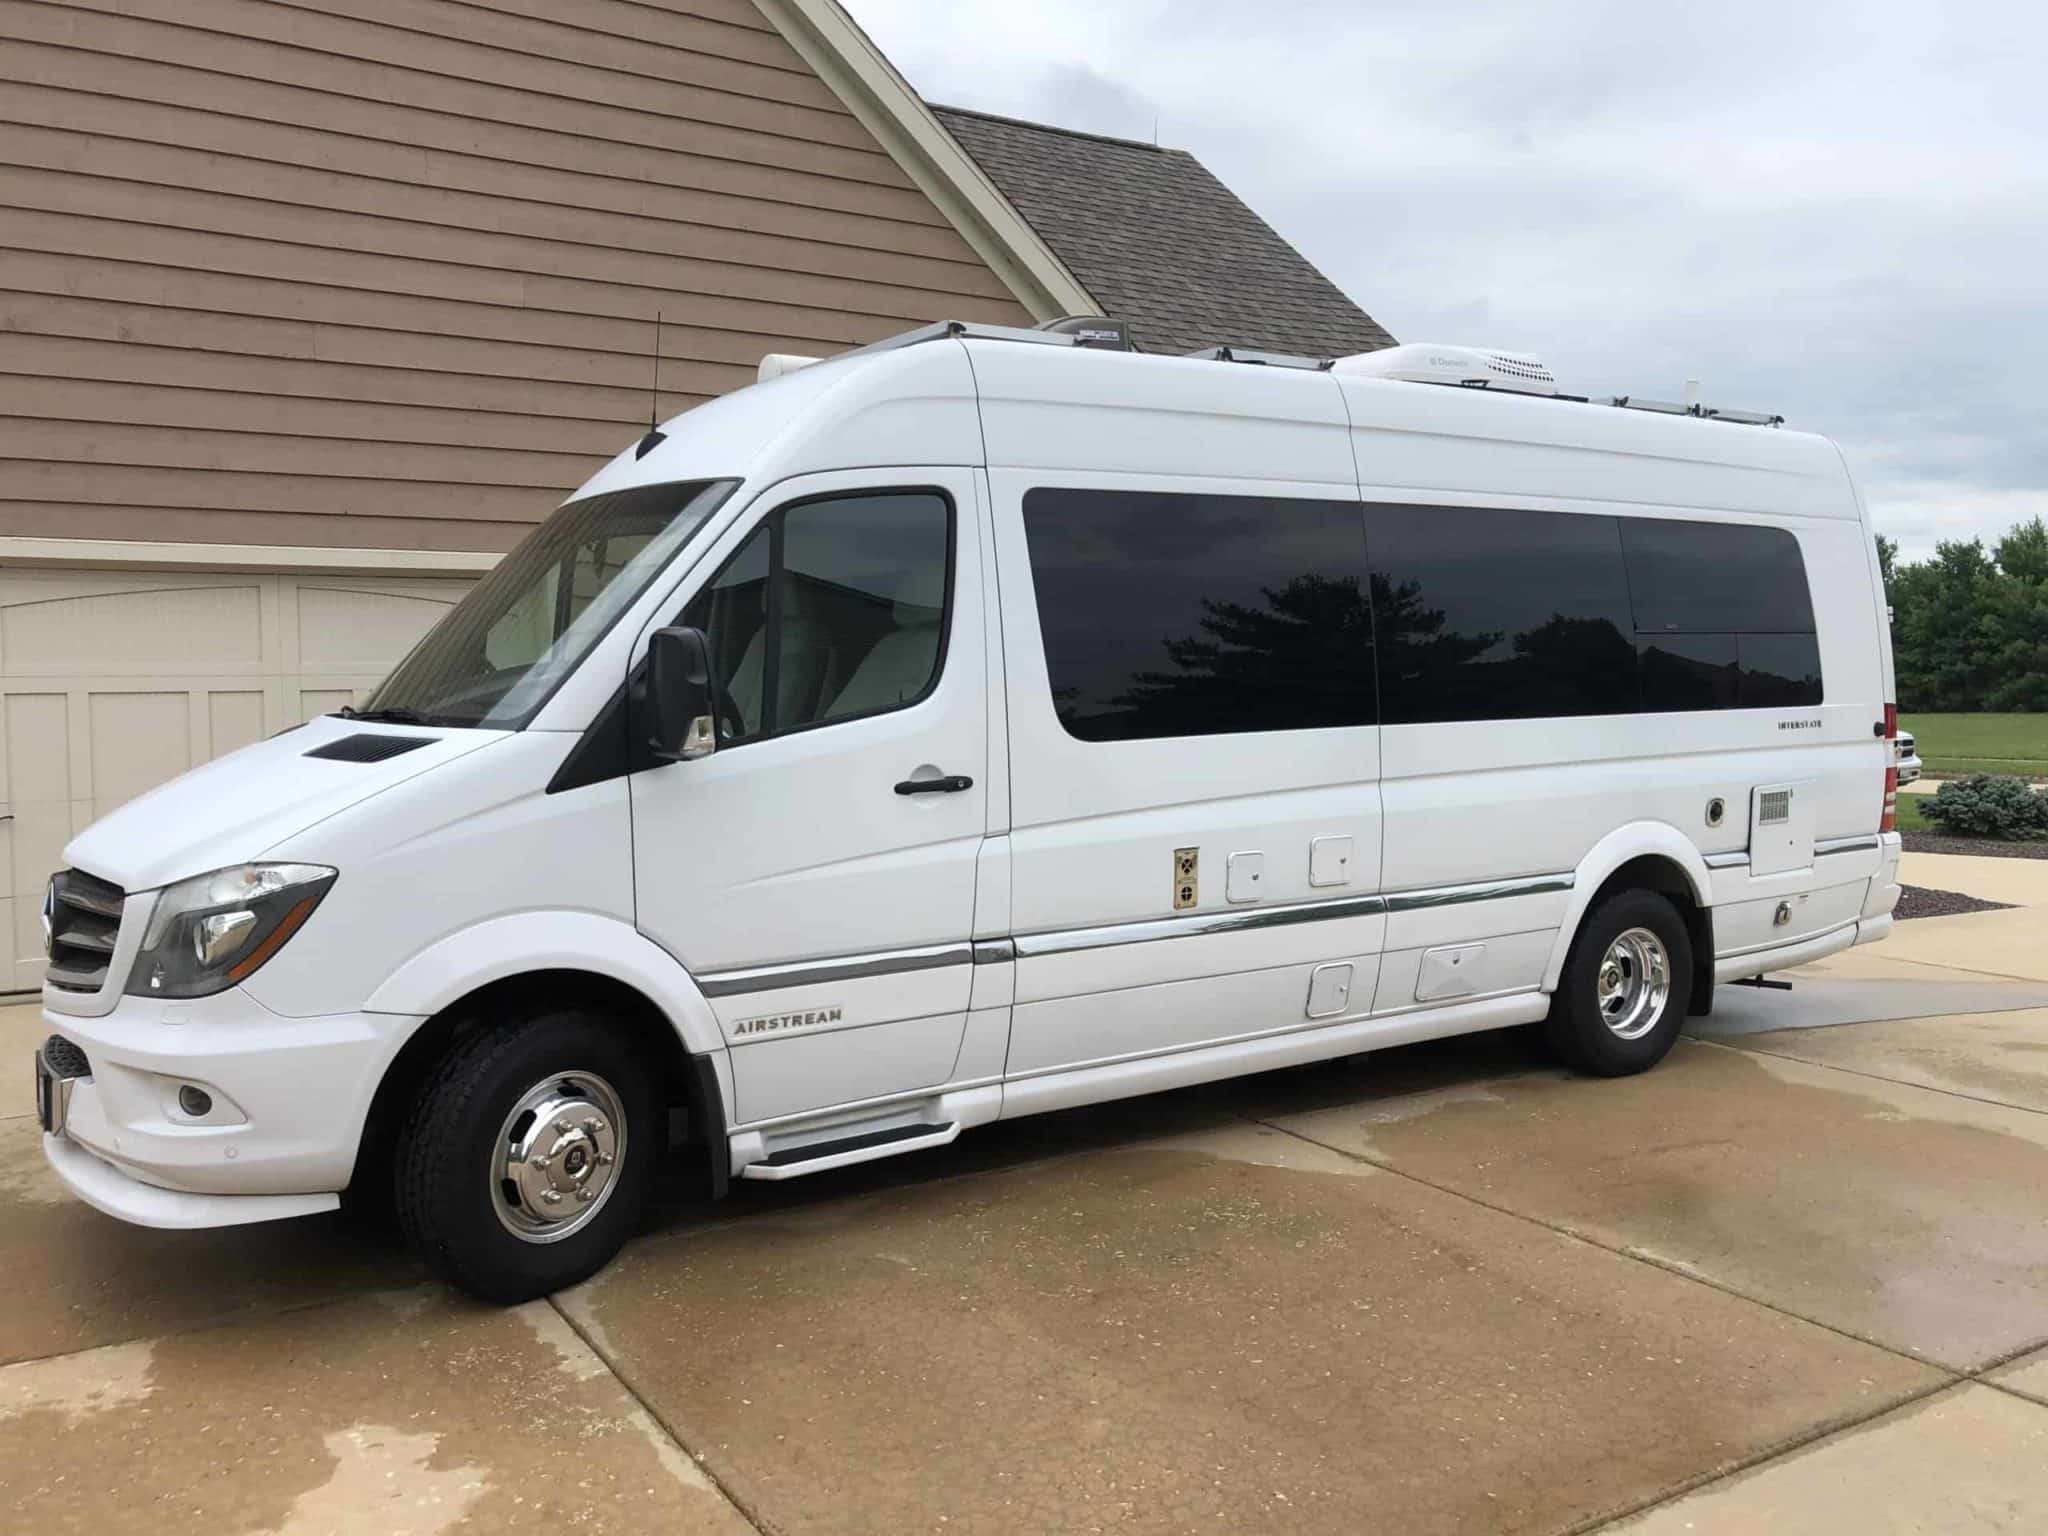 2017 Airstream 24FT Interstate For Sale in Urbana - Airstream Marketplace